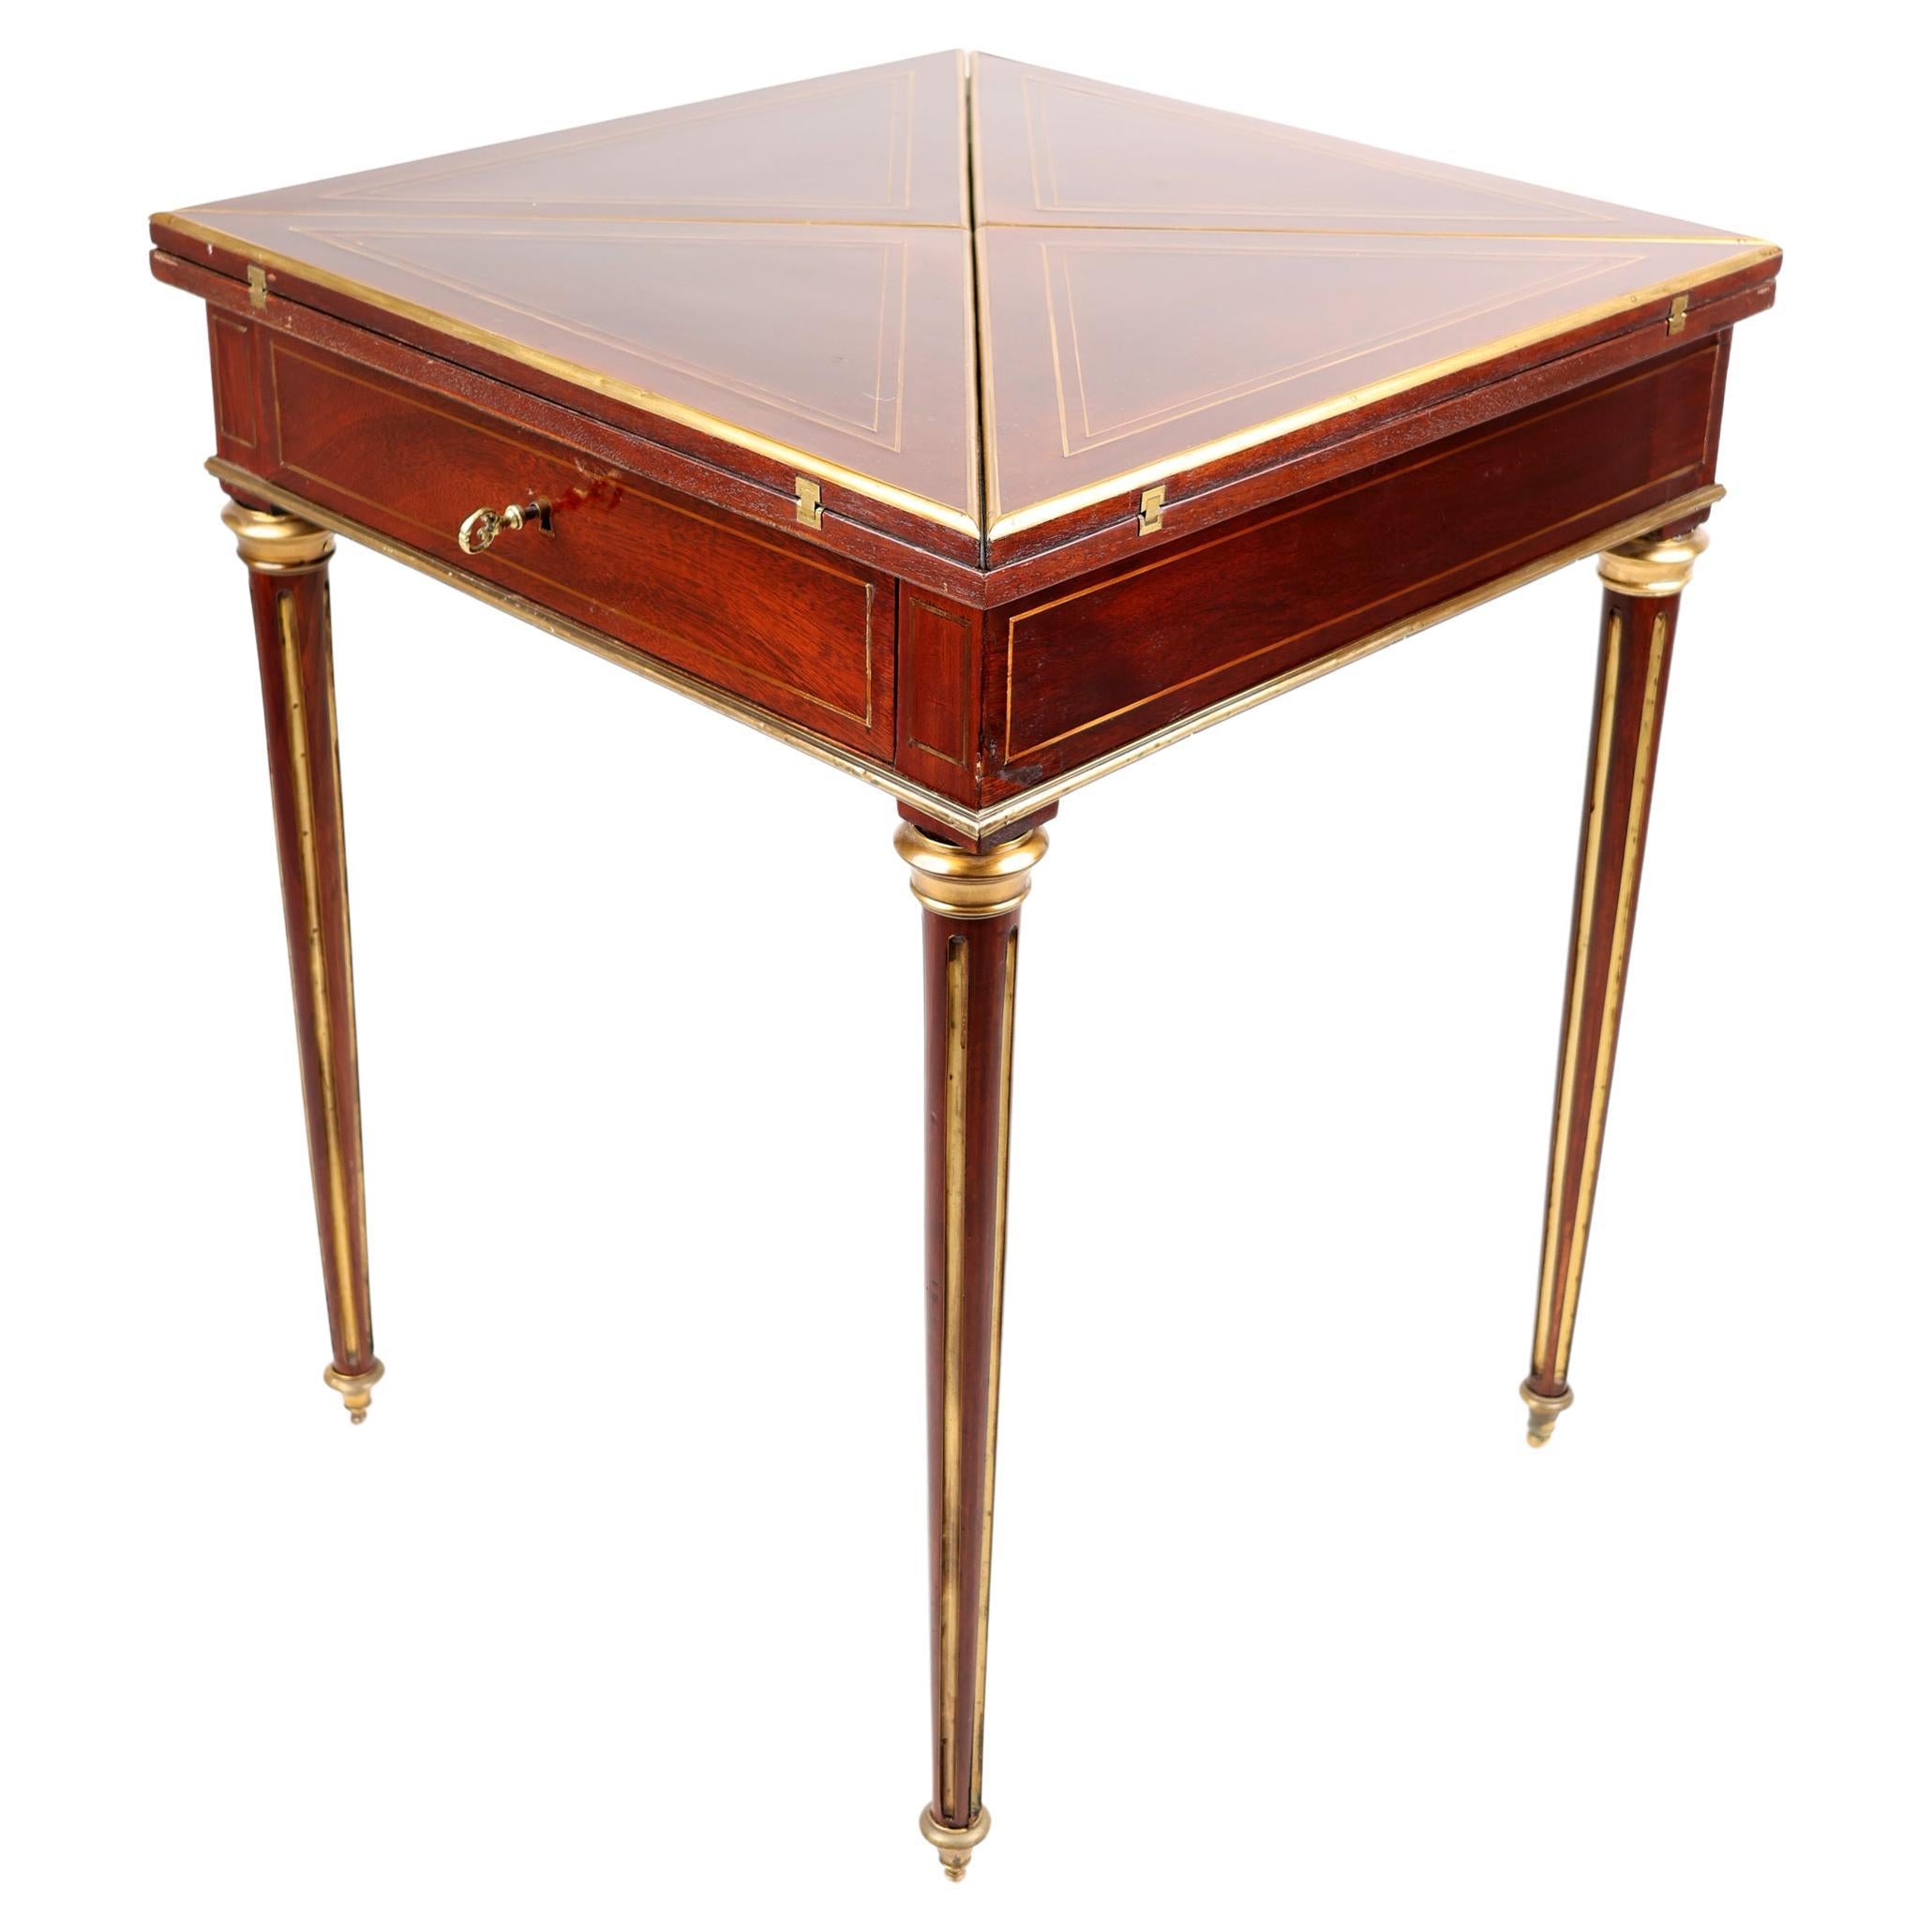 Late XIX Century envelope game table,
France, 1890-1900
Mahogany 

An elegant French envelope game table with brass inlaid. 
By opening the four hinged triangular sections, reveals to us a green felt game surface. Under the game plate, a single